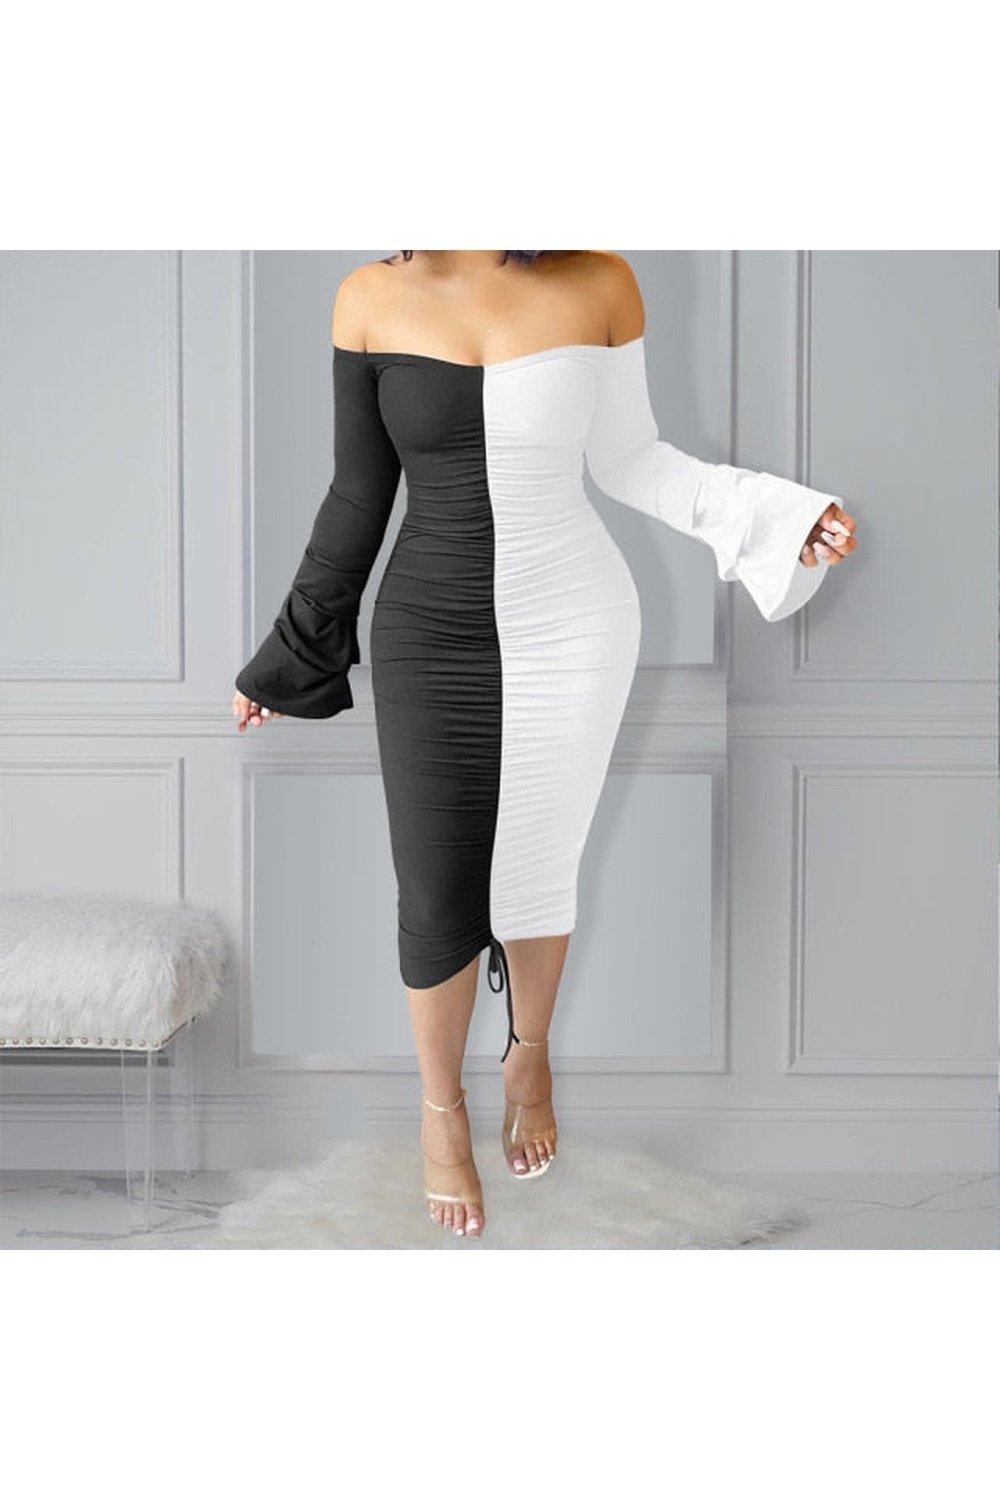 New Arrivals Sexy Women Flare Sleeve Off Shoulder Bodycon Summer White Dress